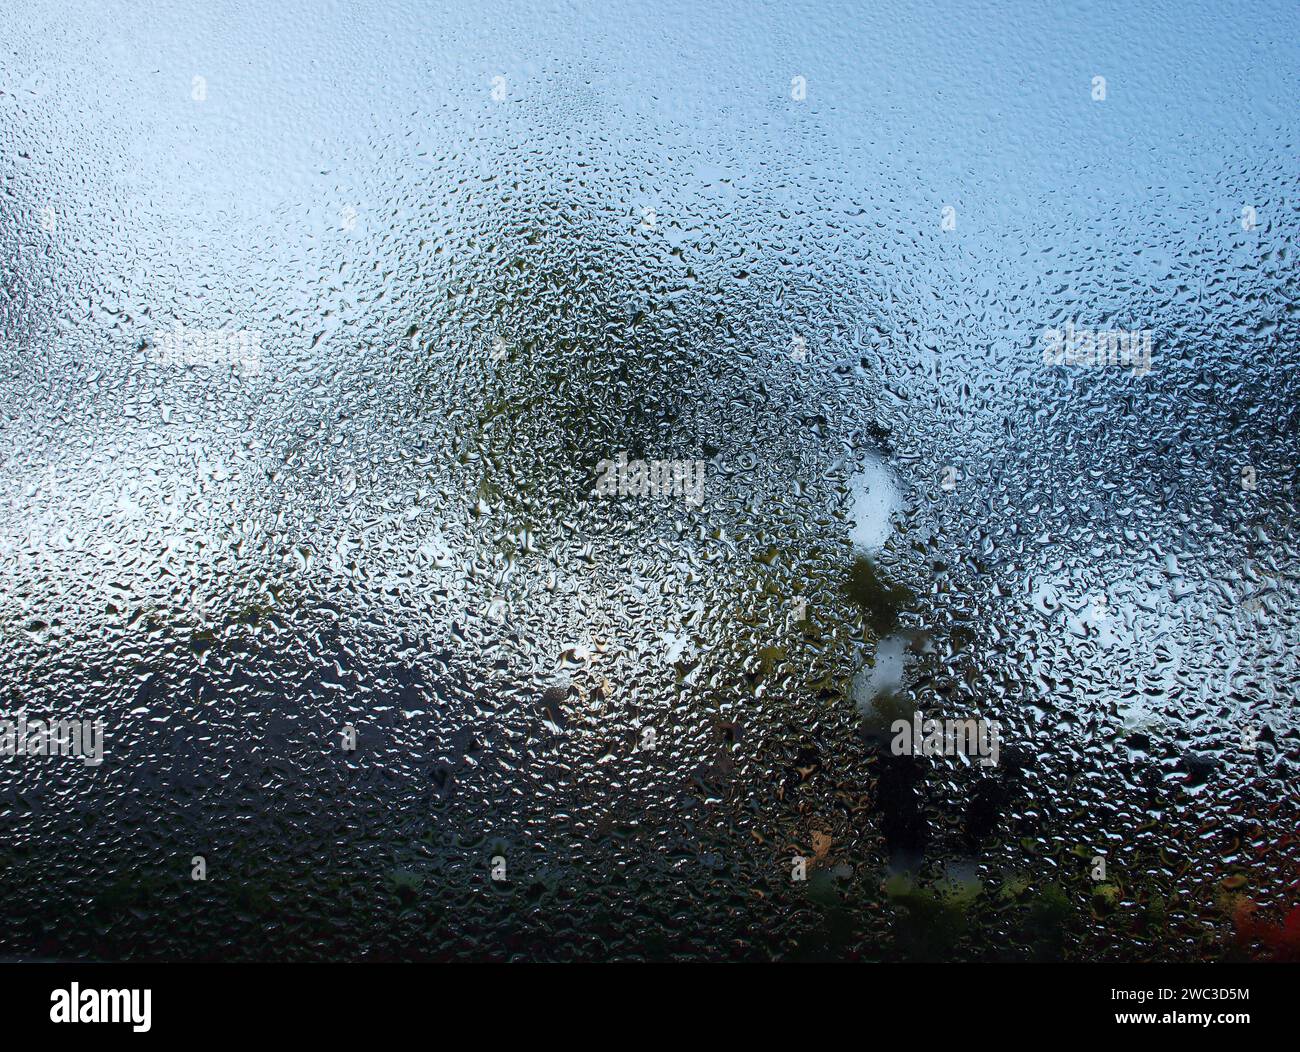 Condensation in glass. Works for illustration of weather and as background or graphic compositing element. Stock Photo